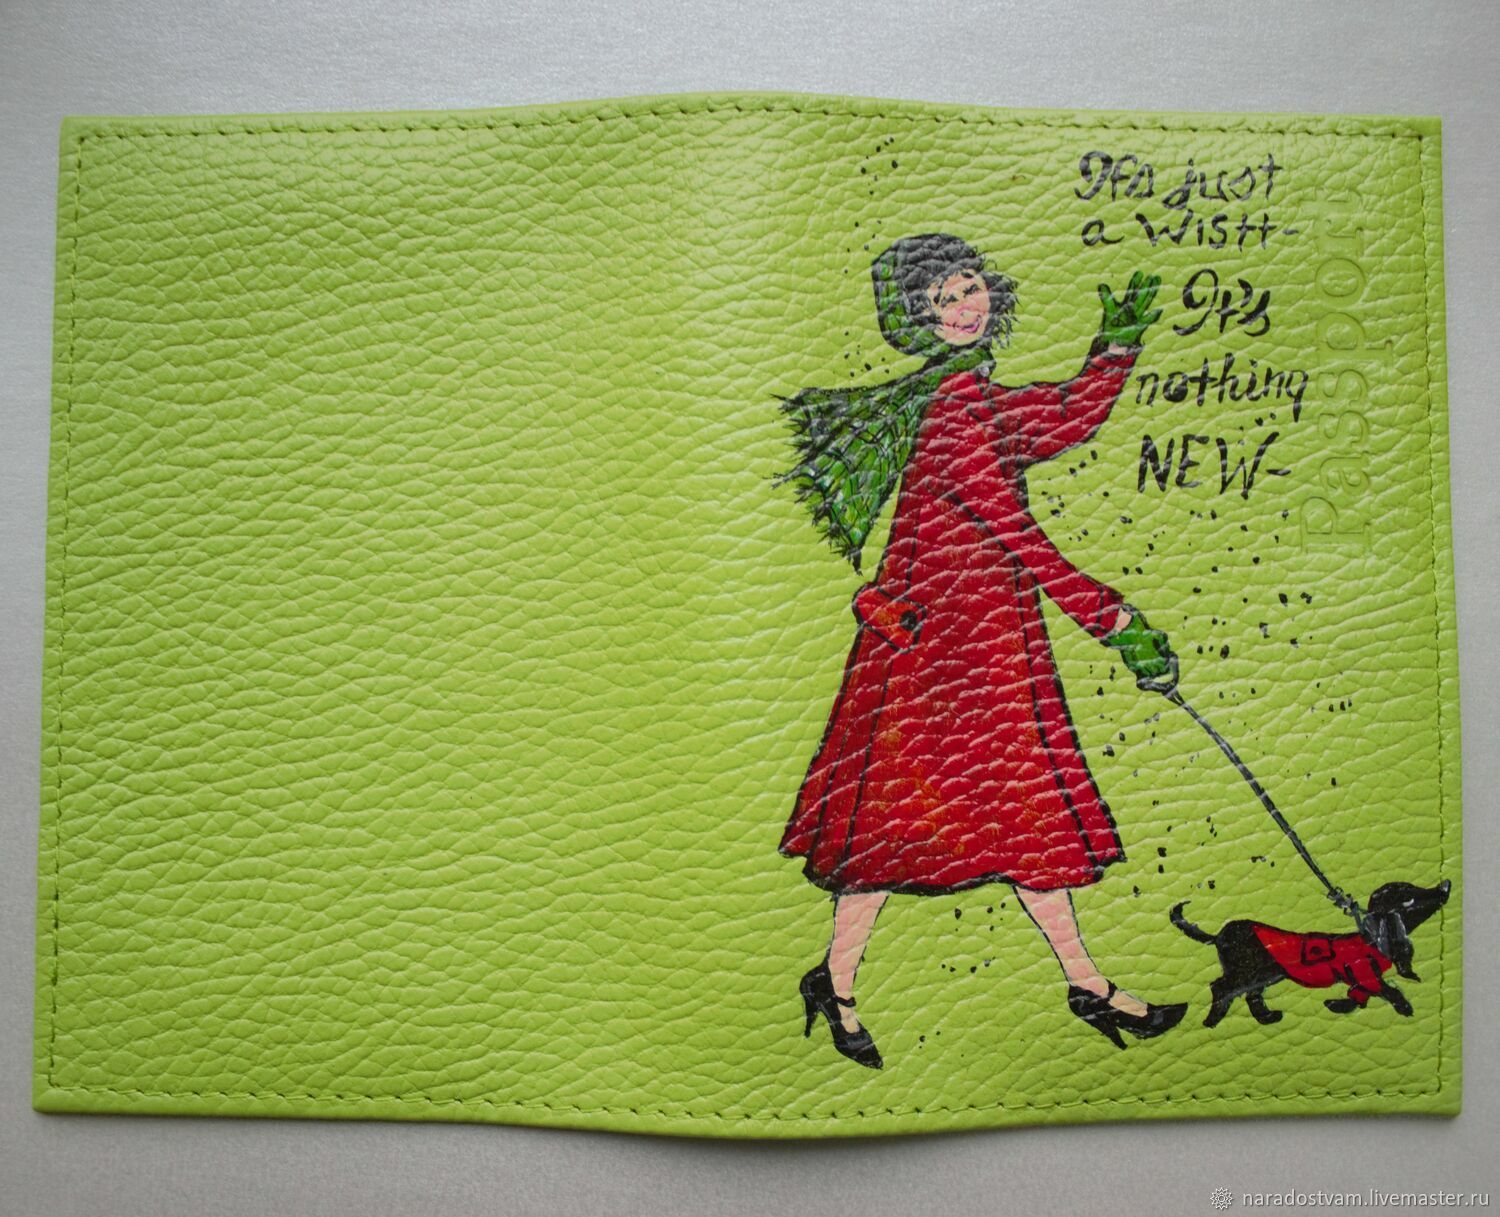  The lady with the dog, Passport cover, Protvino,  Фото №1